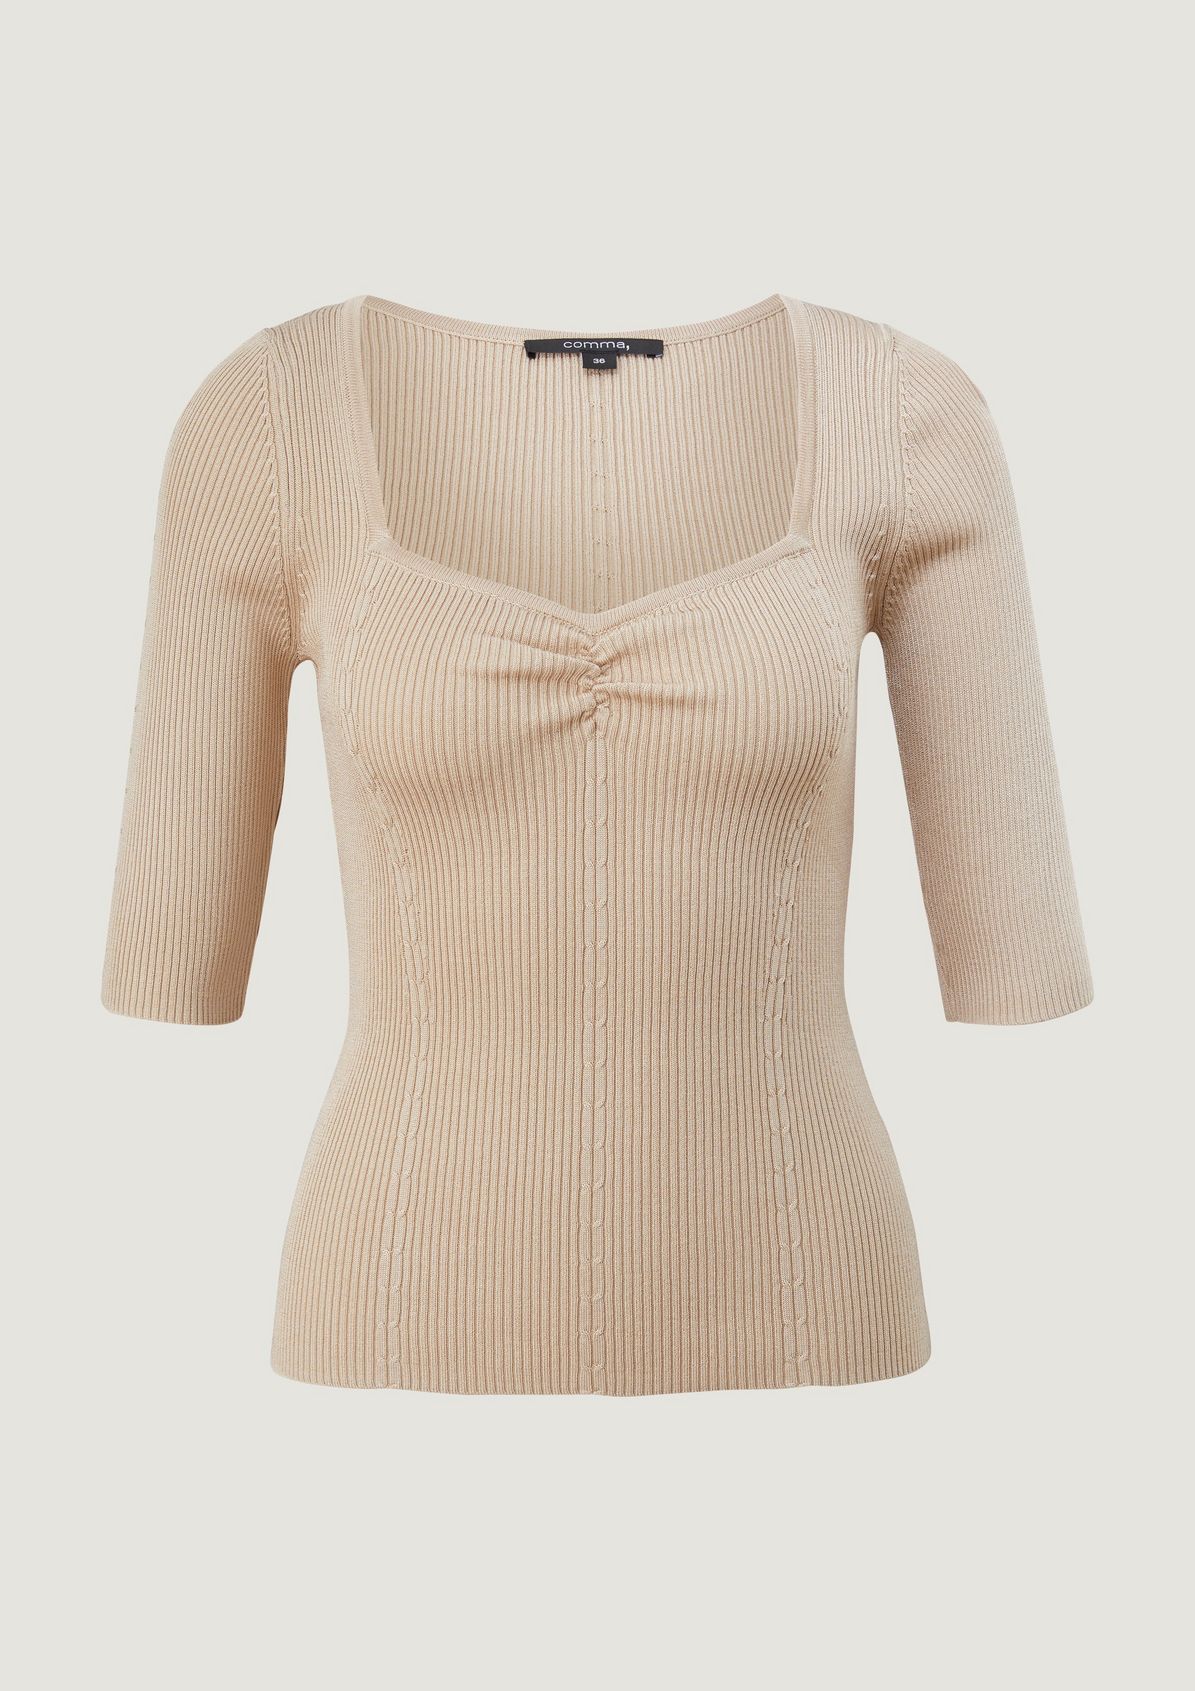 Fine knit top with a cable pattern from comma